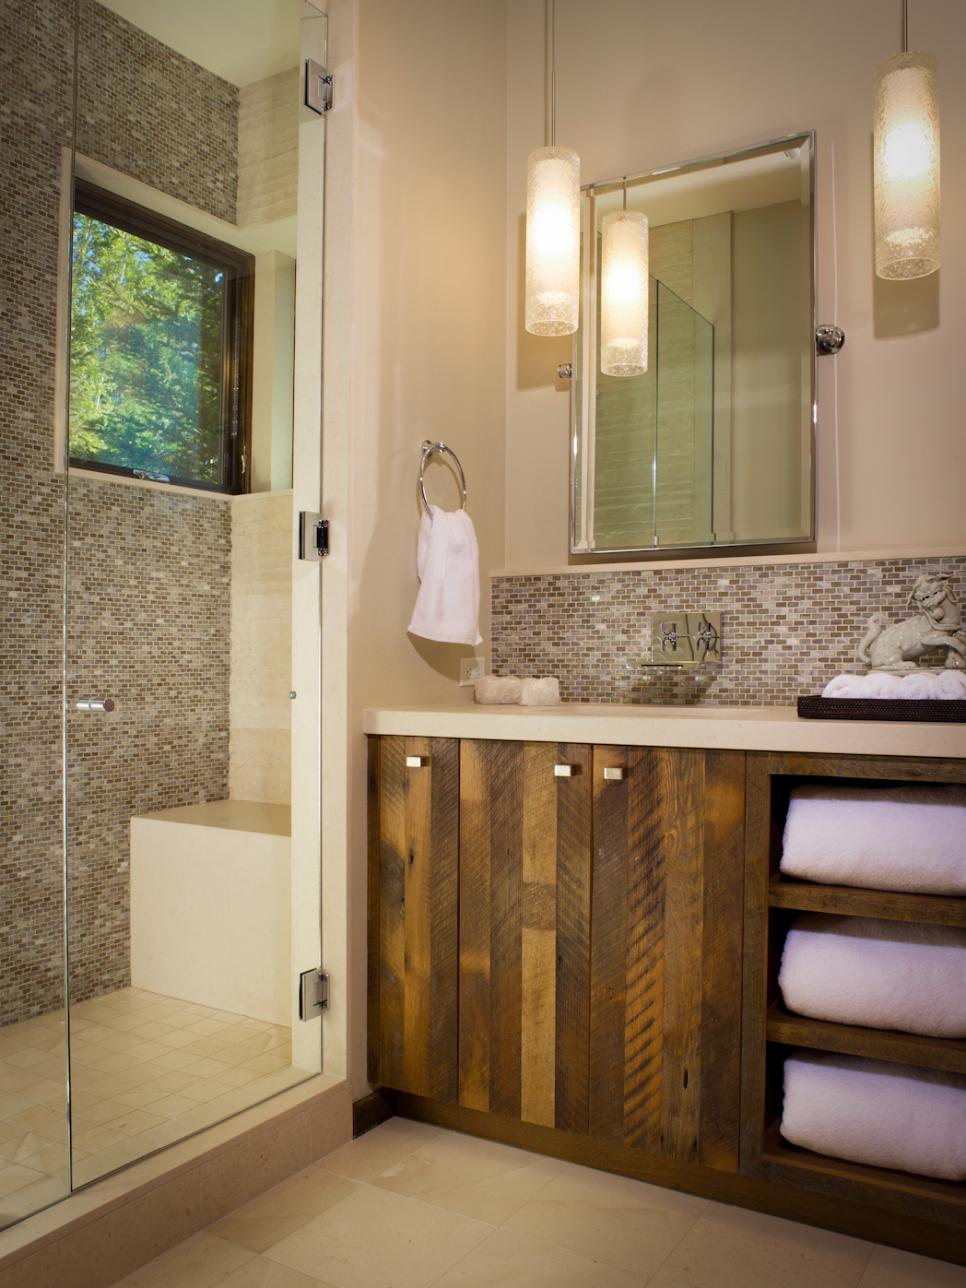 Walk-In Shower Features Beautiful Mosaic Tile Wall | HGTV